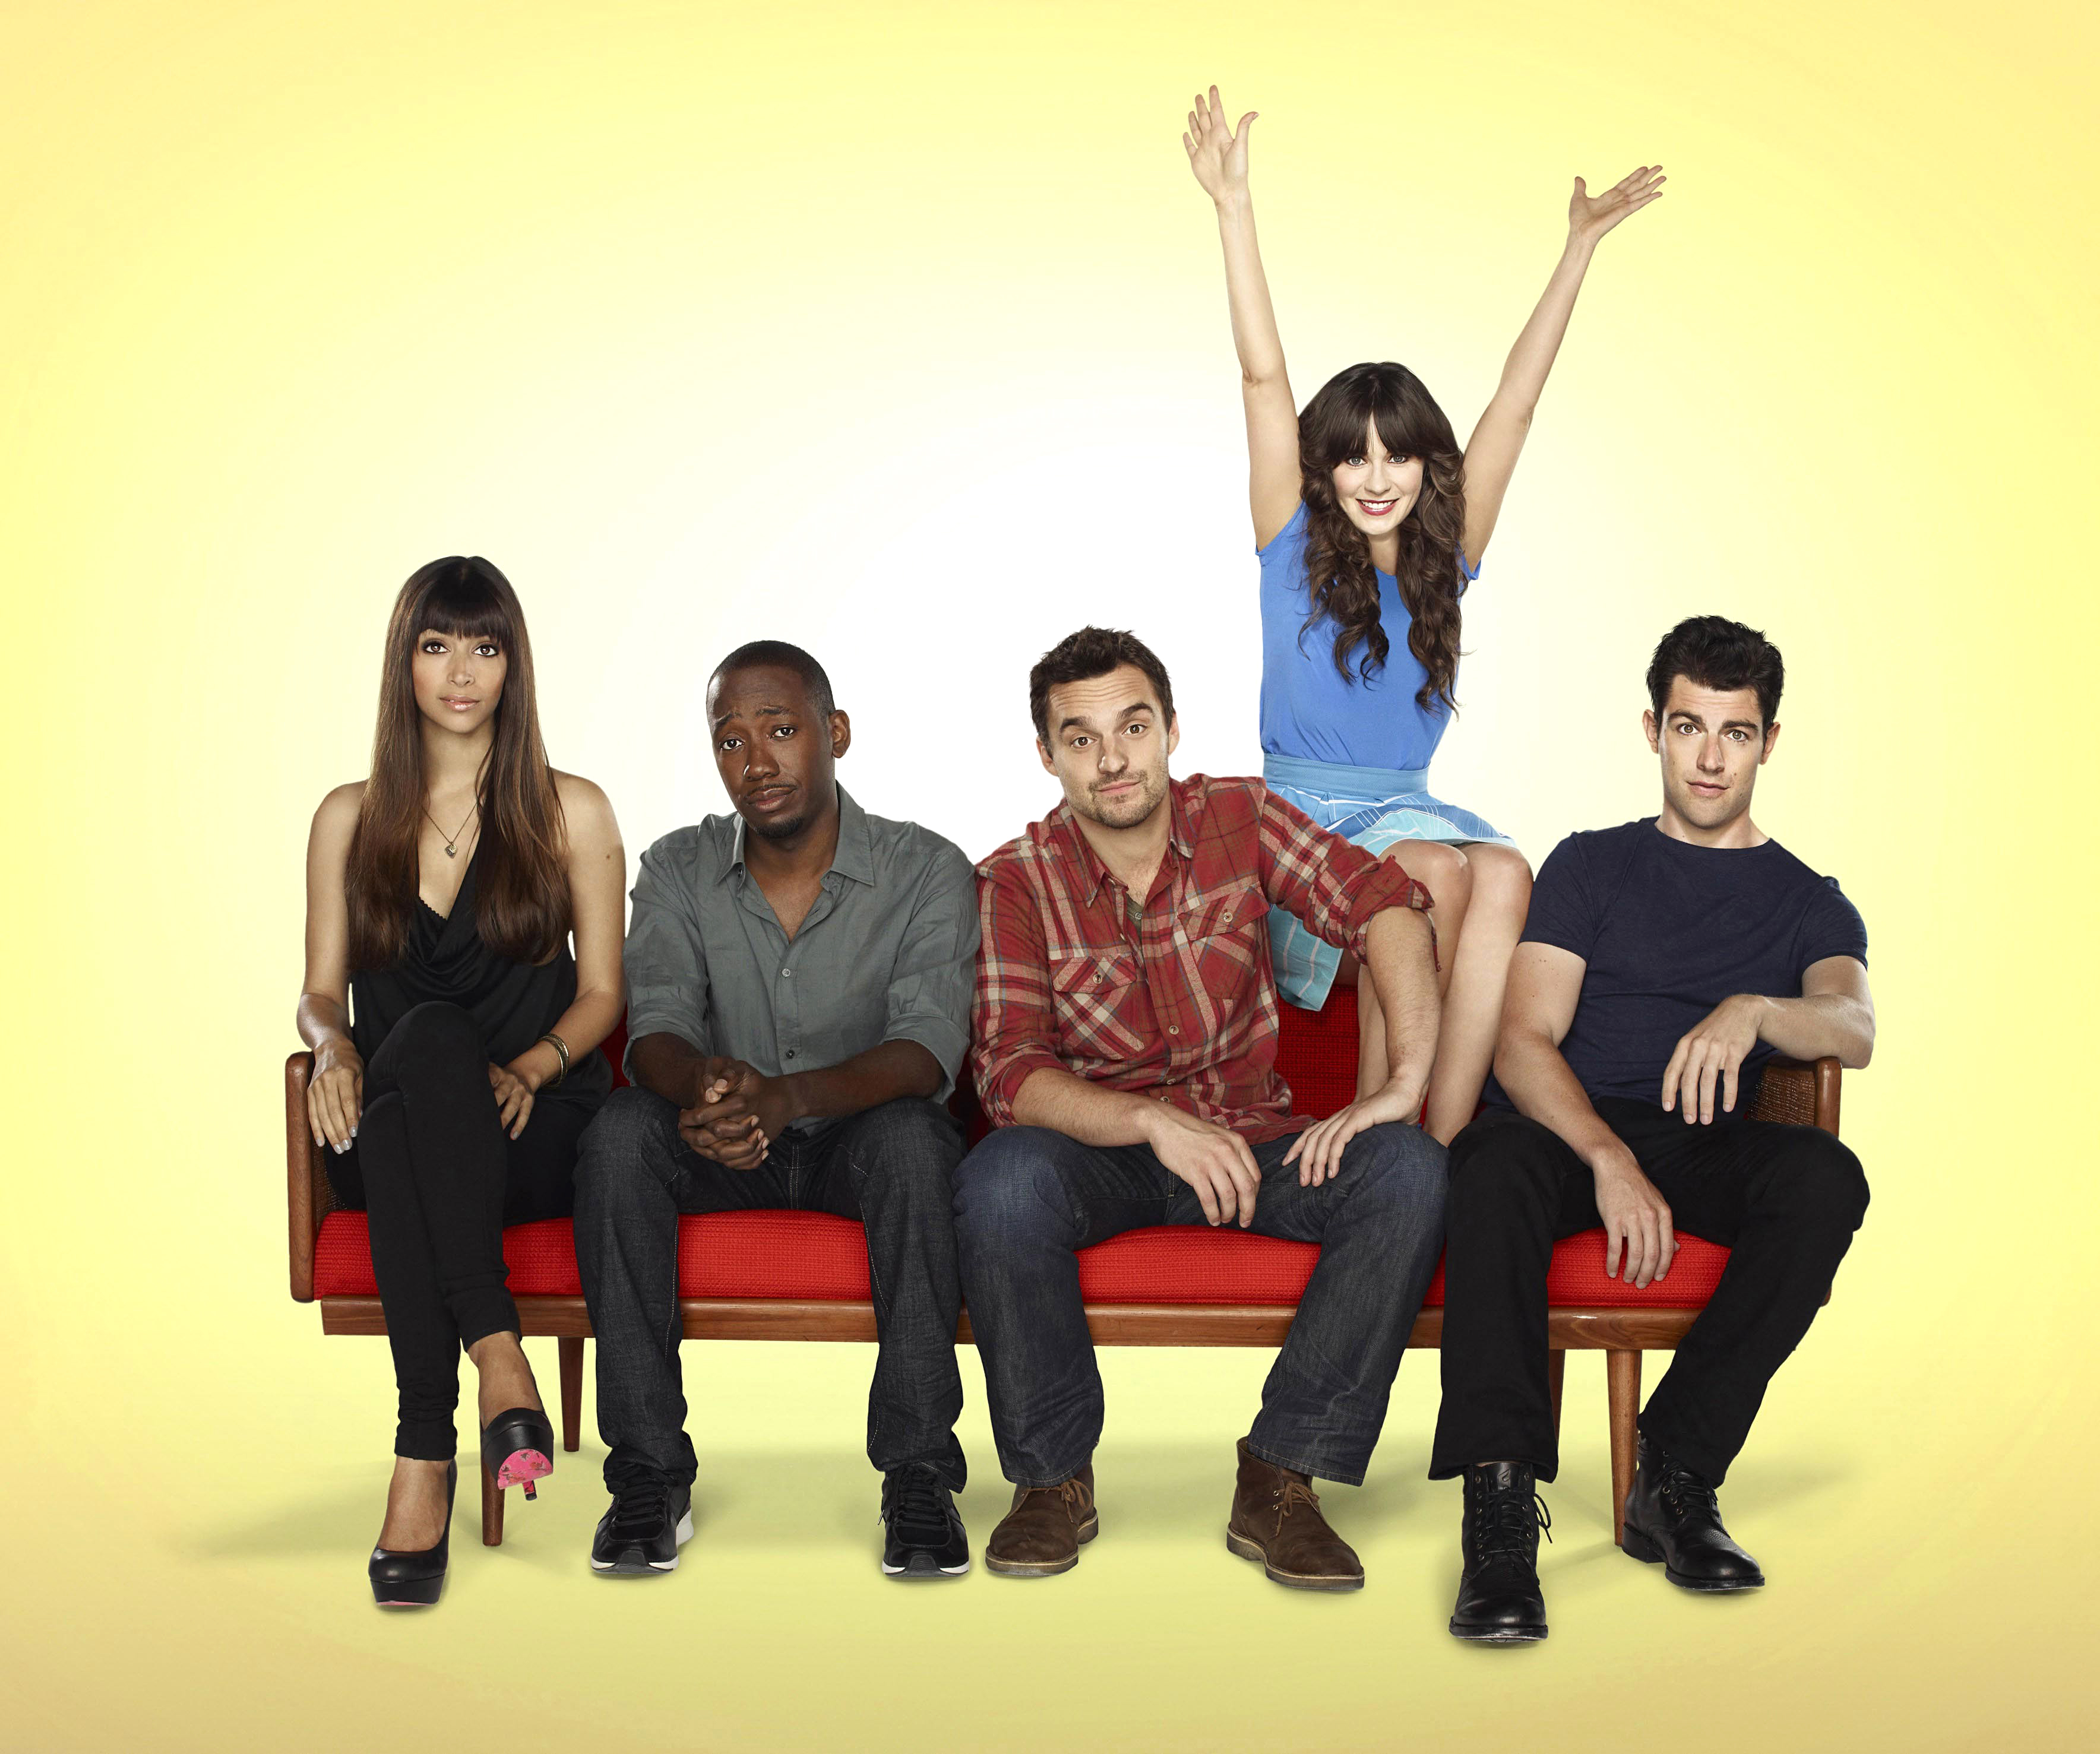 New Girl' Cast: Where Are They Now? new girl season 1 episode 1 watch ...